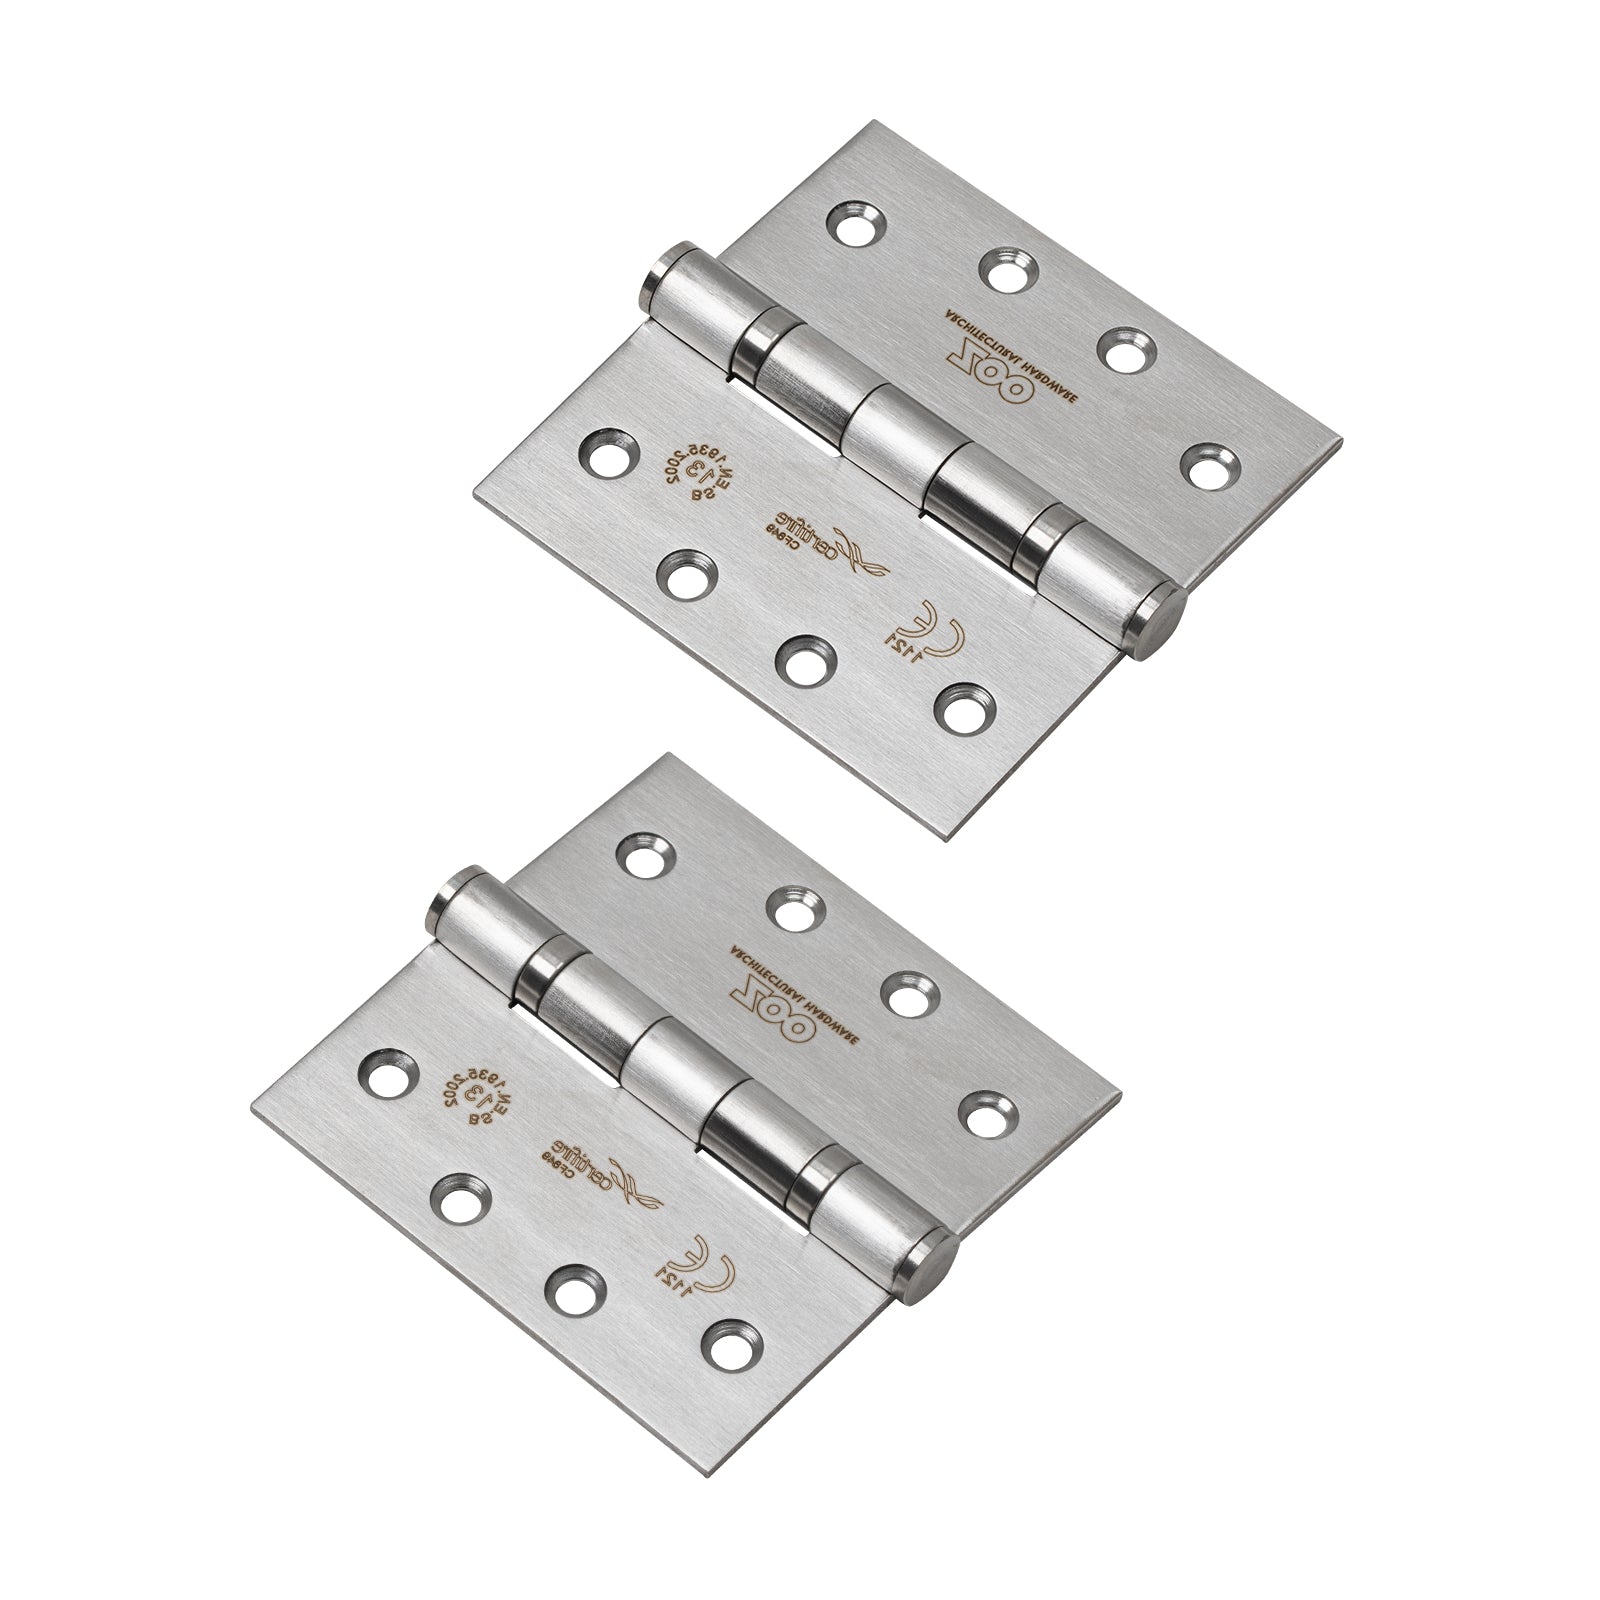 Wide ball bearing hinges 4 inch, fire rated door hinges, grade 13 stainless steel